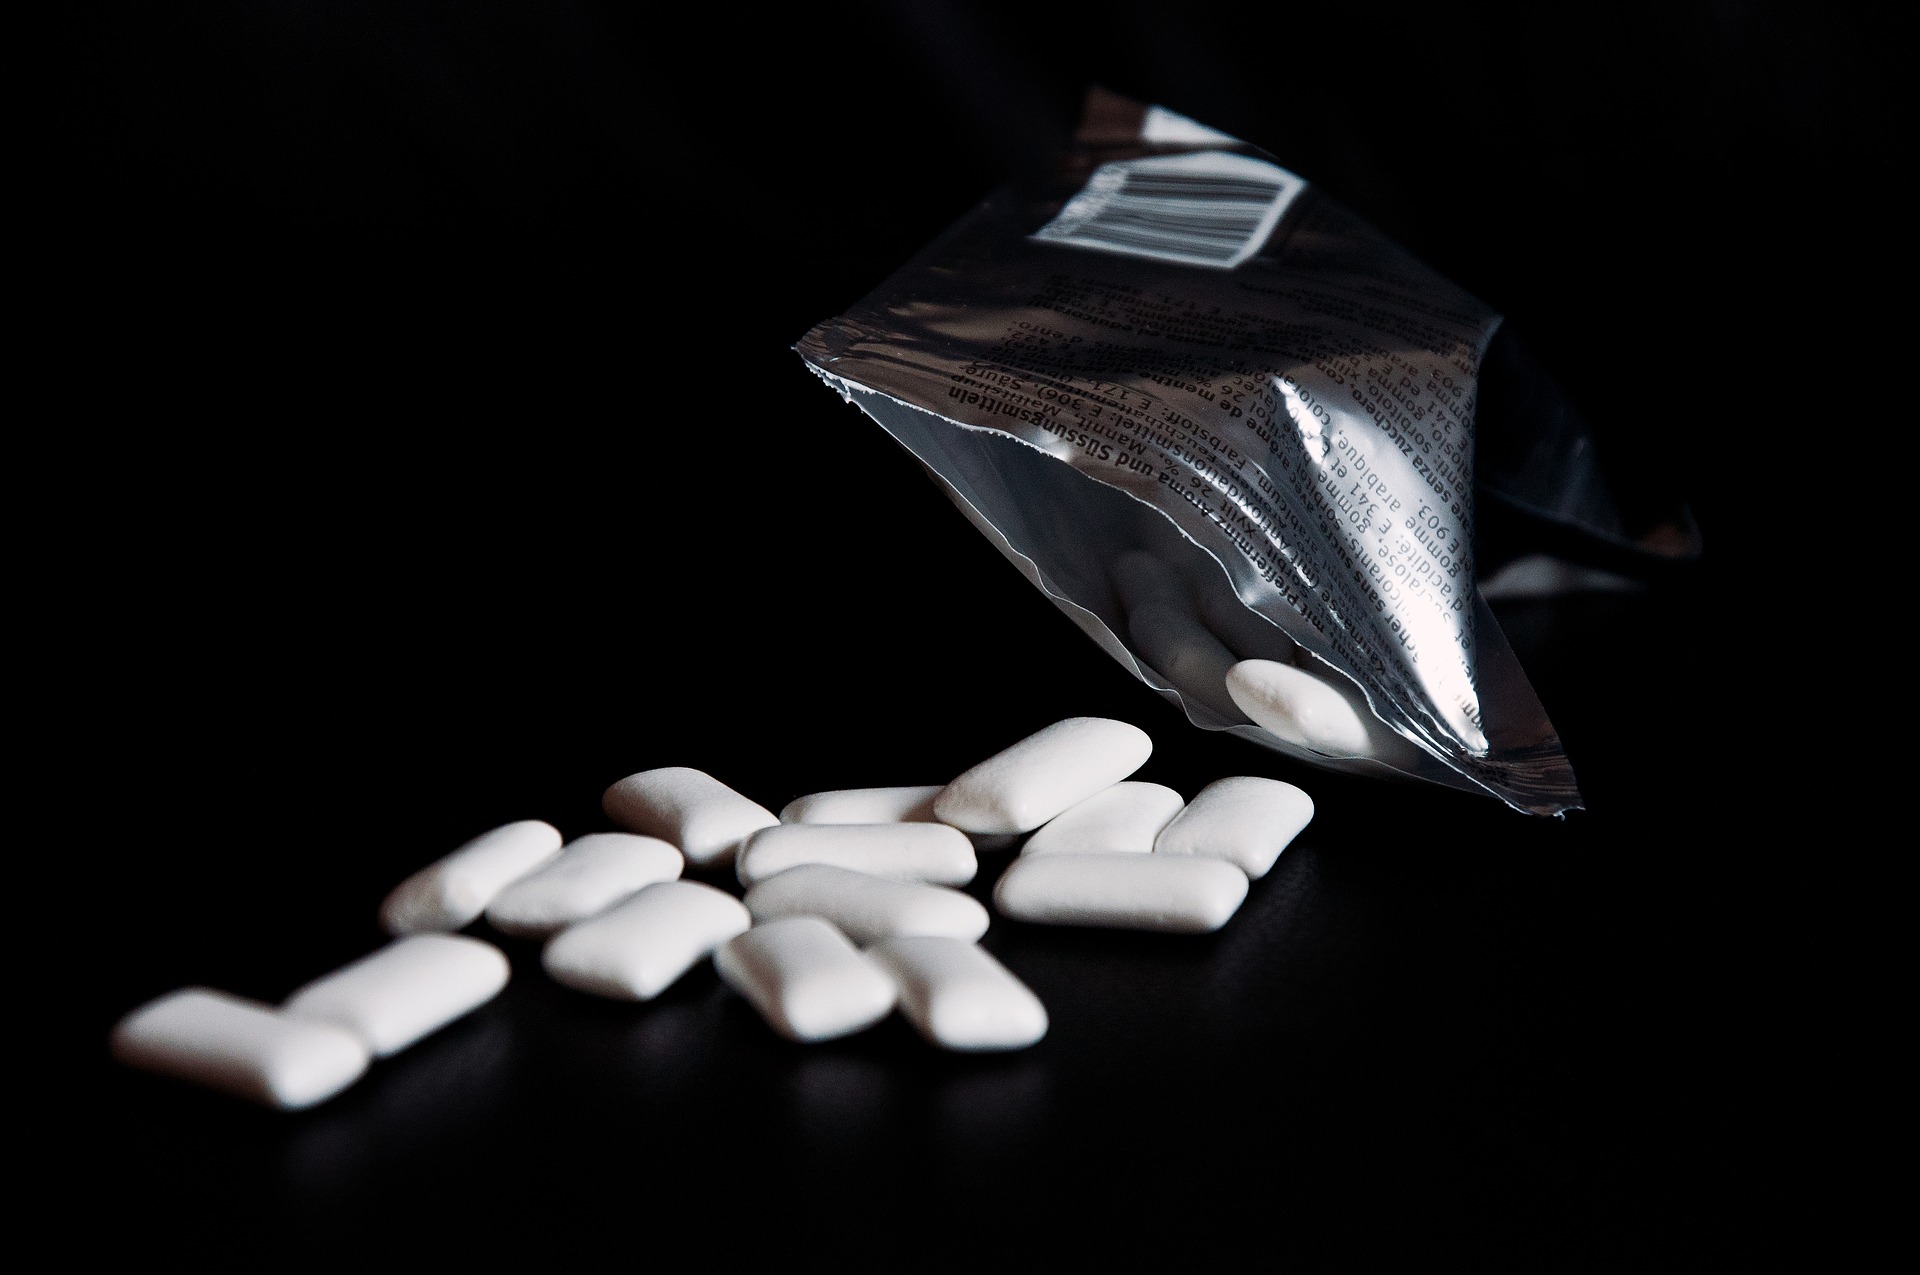 A packet of chewing gum. The story is about chewing gum minimising gut discomfort after heart surgery and various other surgeries. This image is a representative of chewing gum.